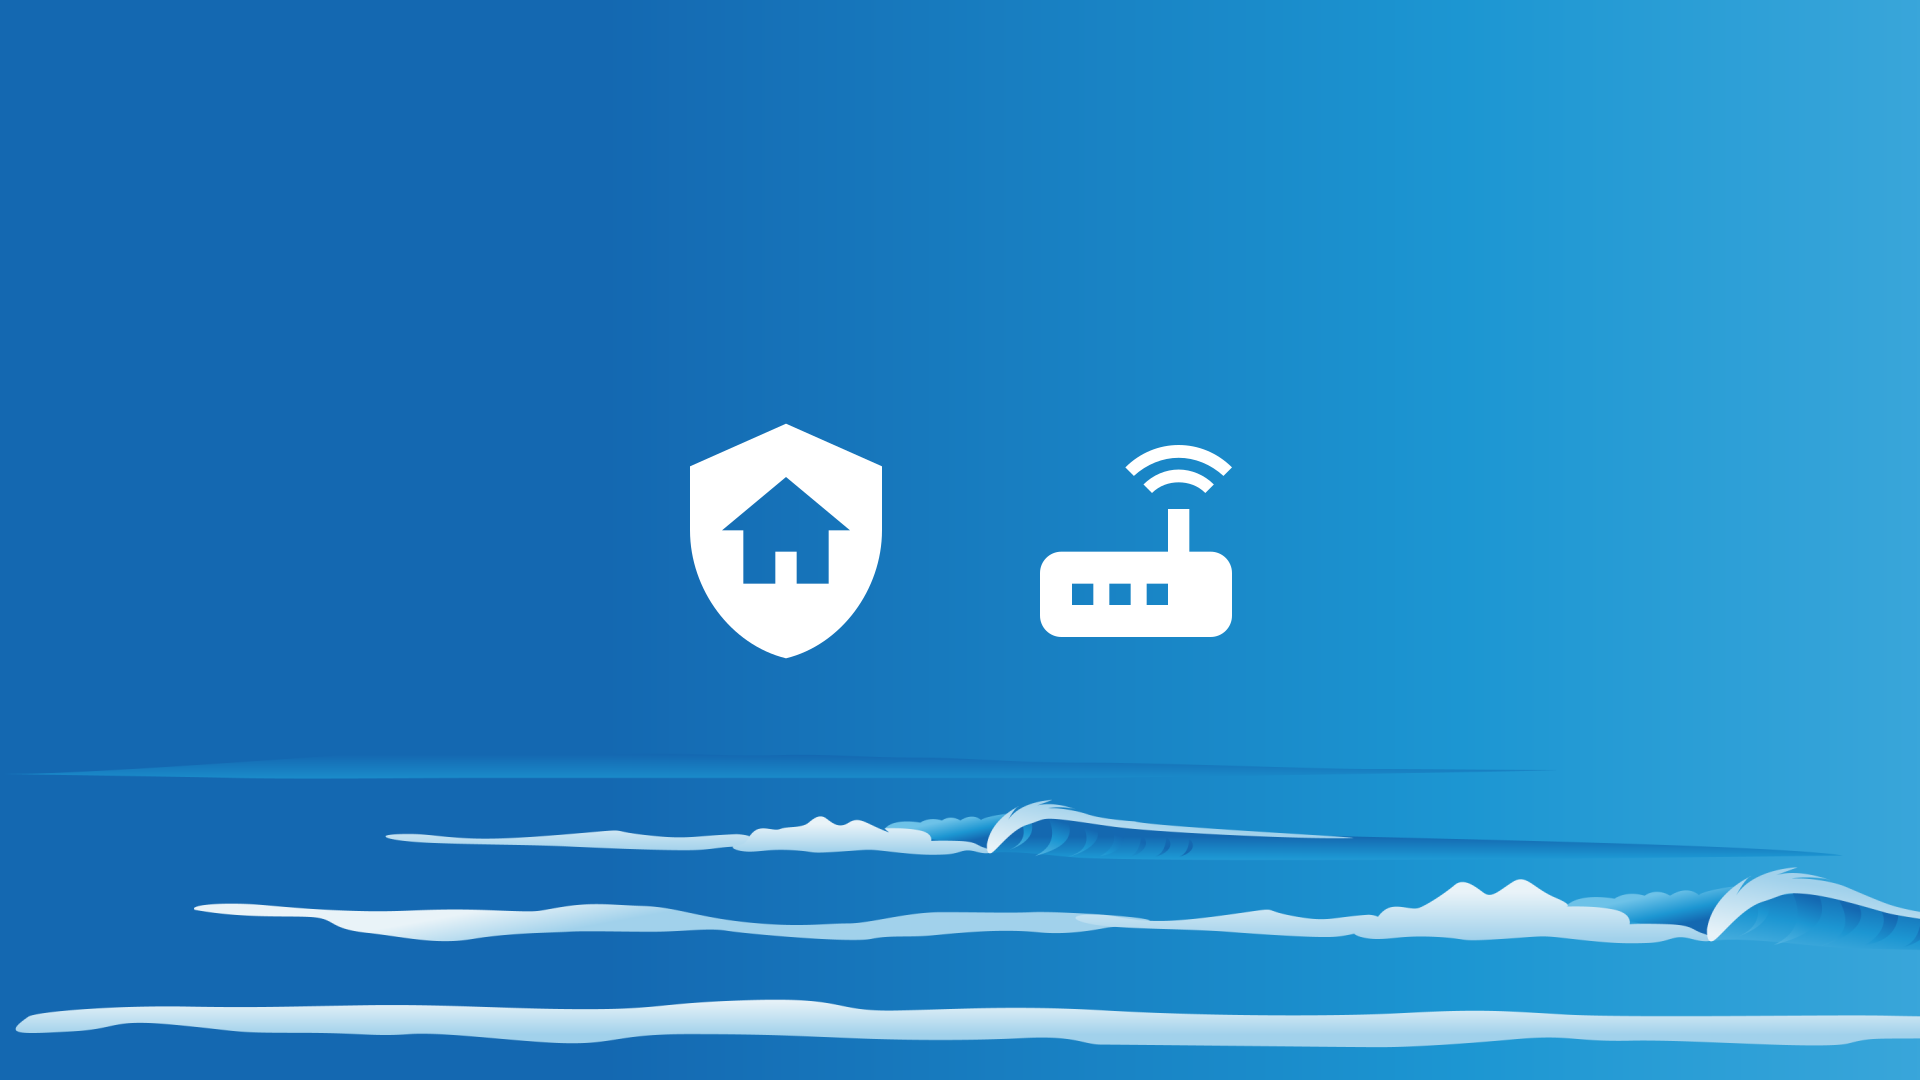 Sea background with home icon and router icon